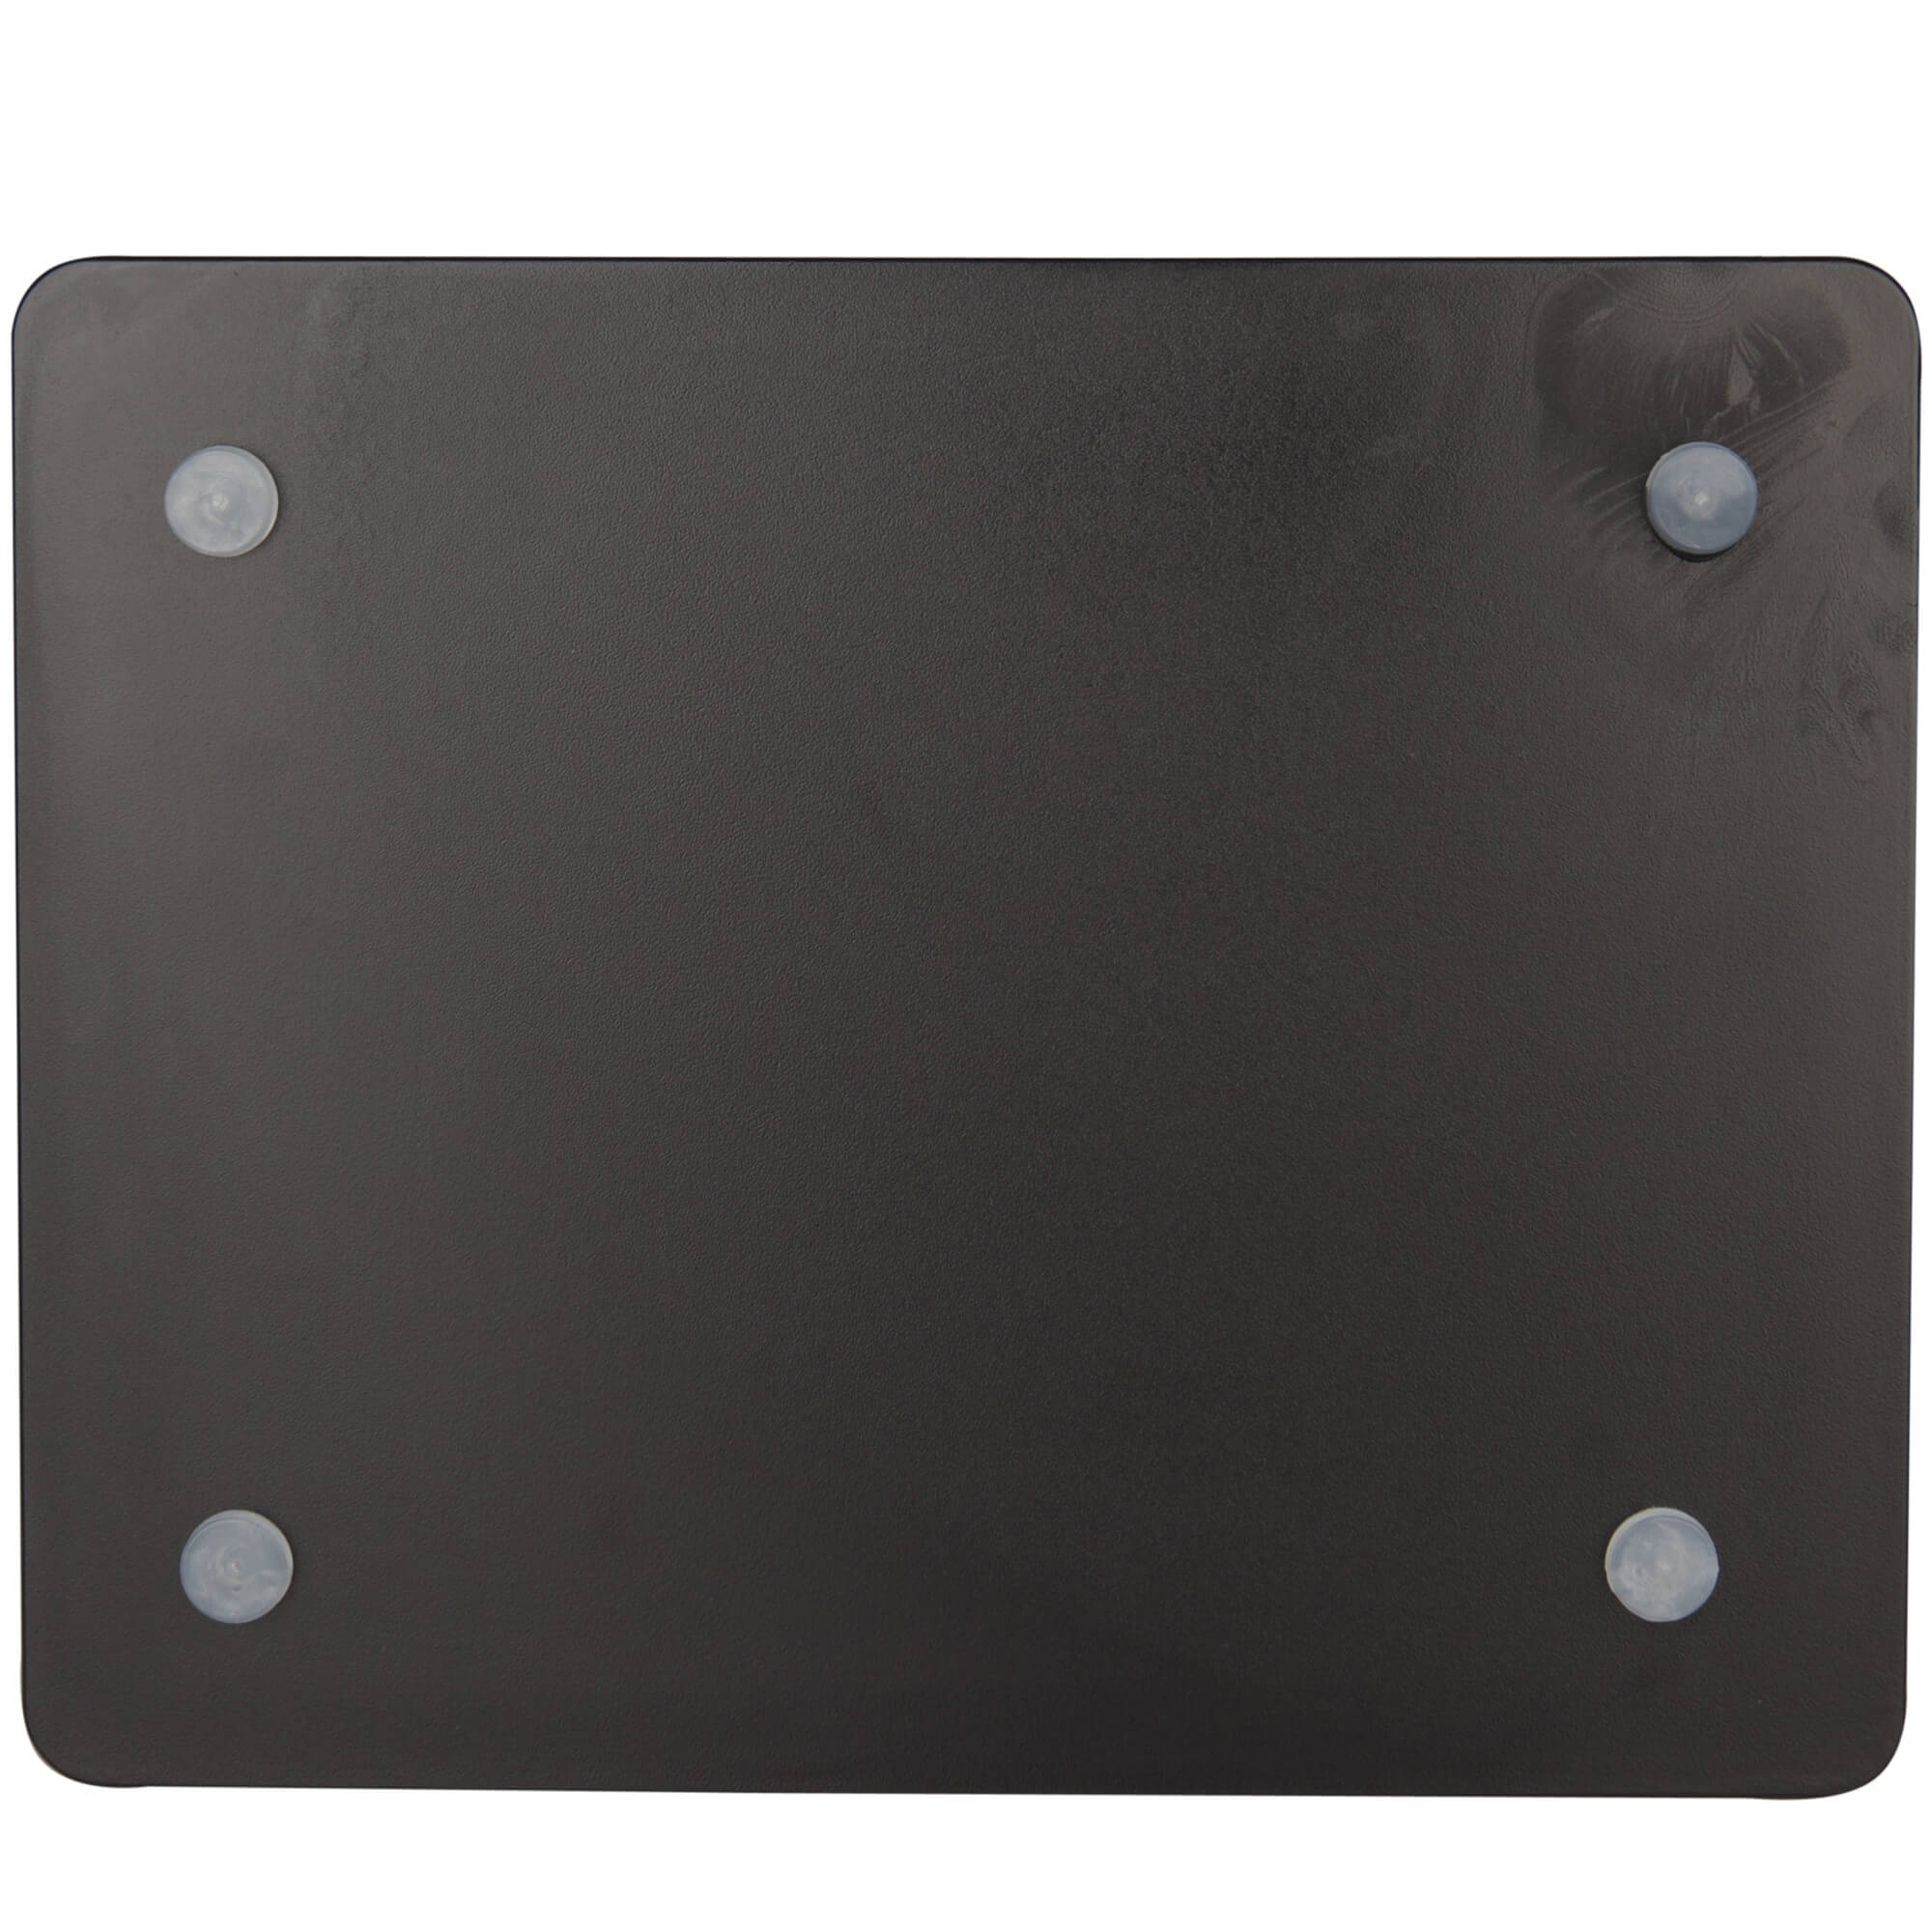 Cutting board with juice groove, HDPE black - 32,5x26,5x1,4cm